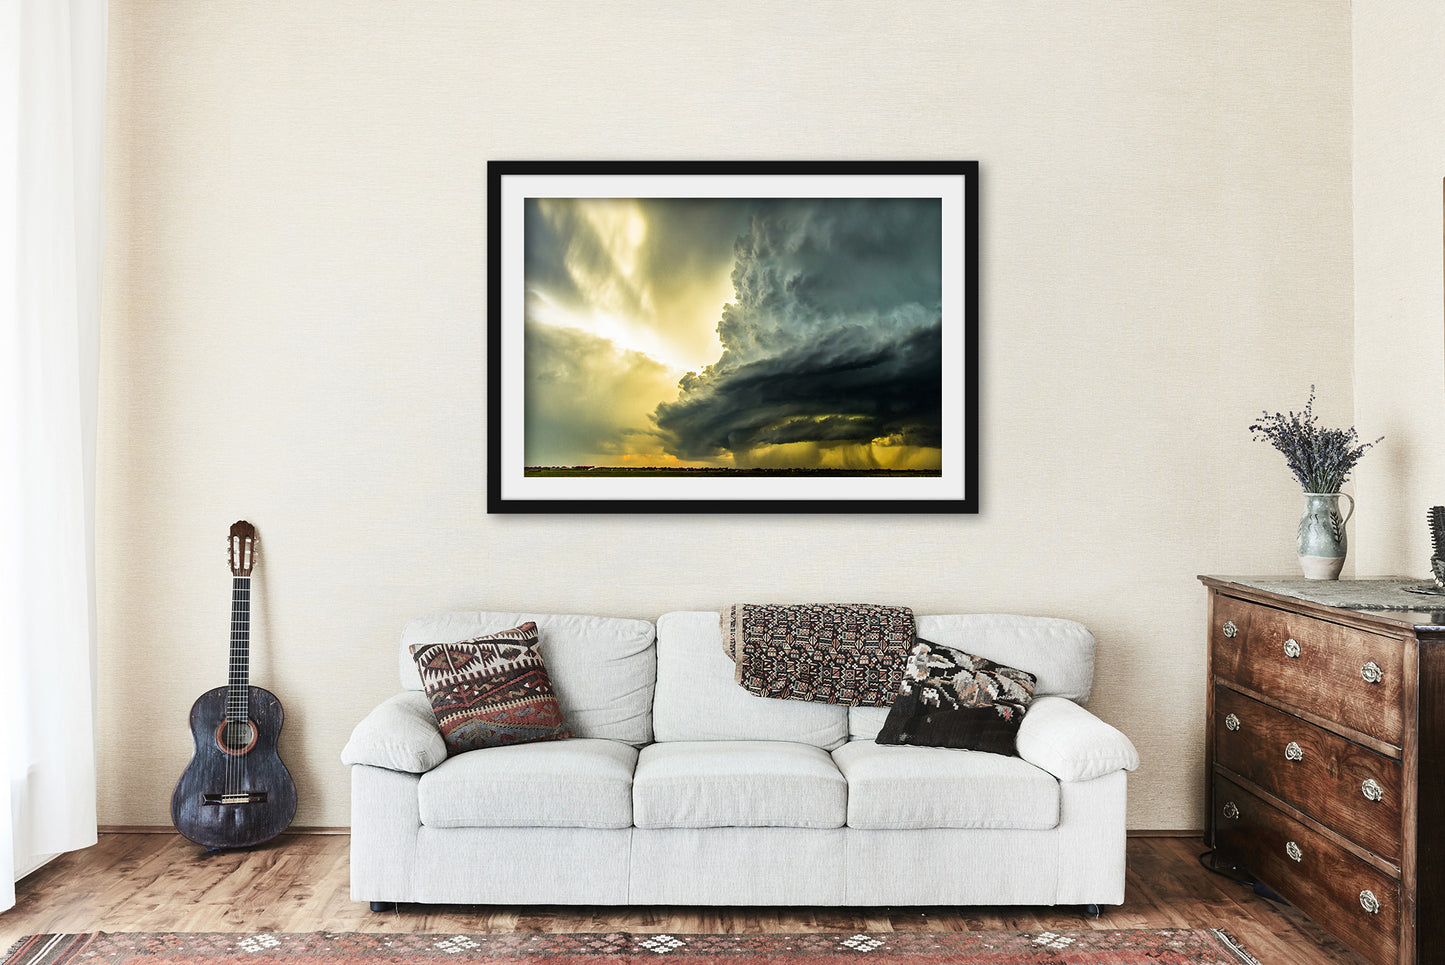 Framed and Matted Print - Picture of Supercell Thunderstorm Over Plains in Oklahoma - Storm Photography Weather Wall Art Photo Artwork Decor